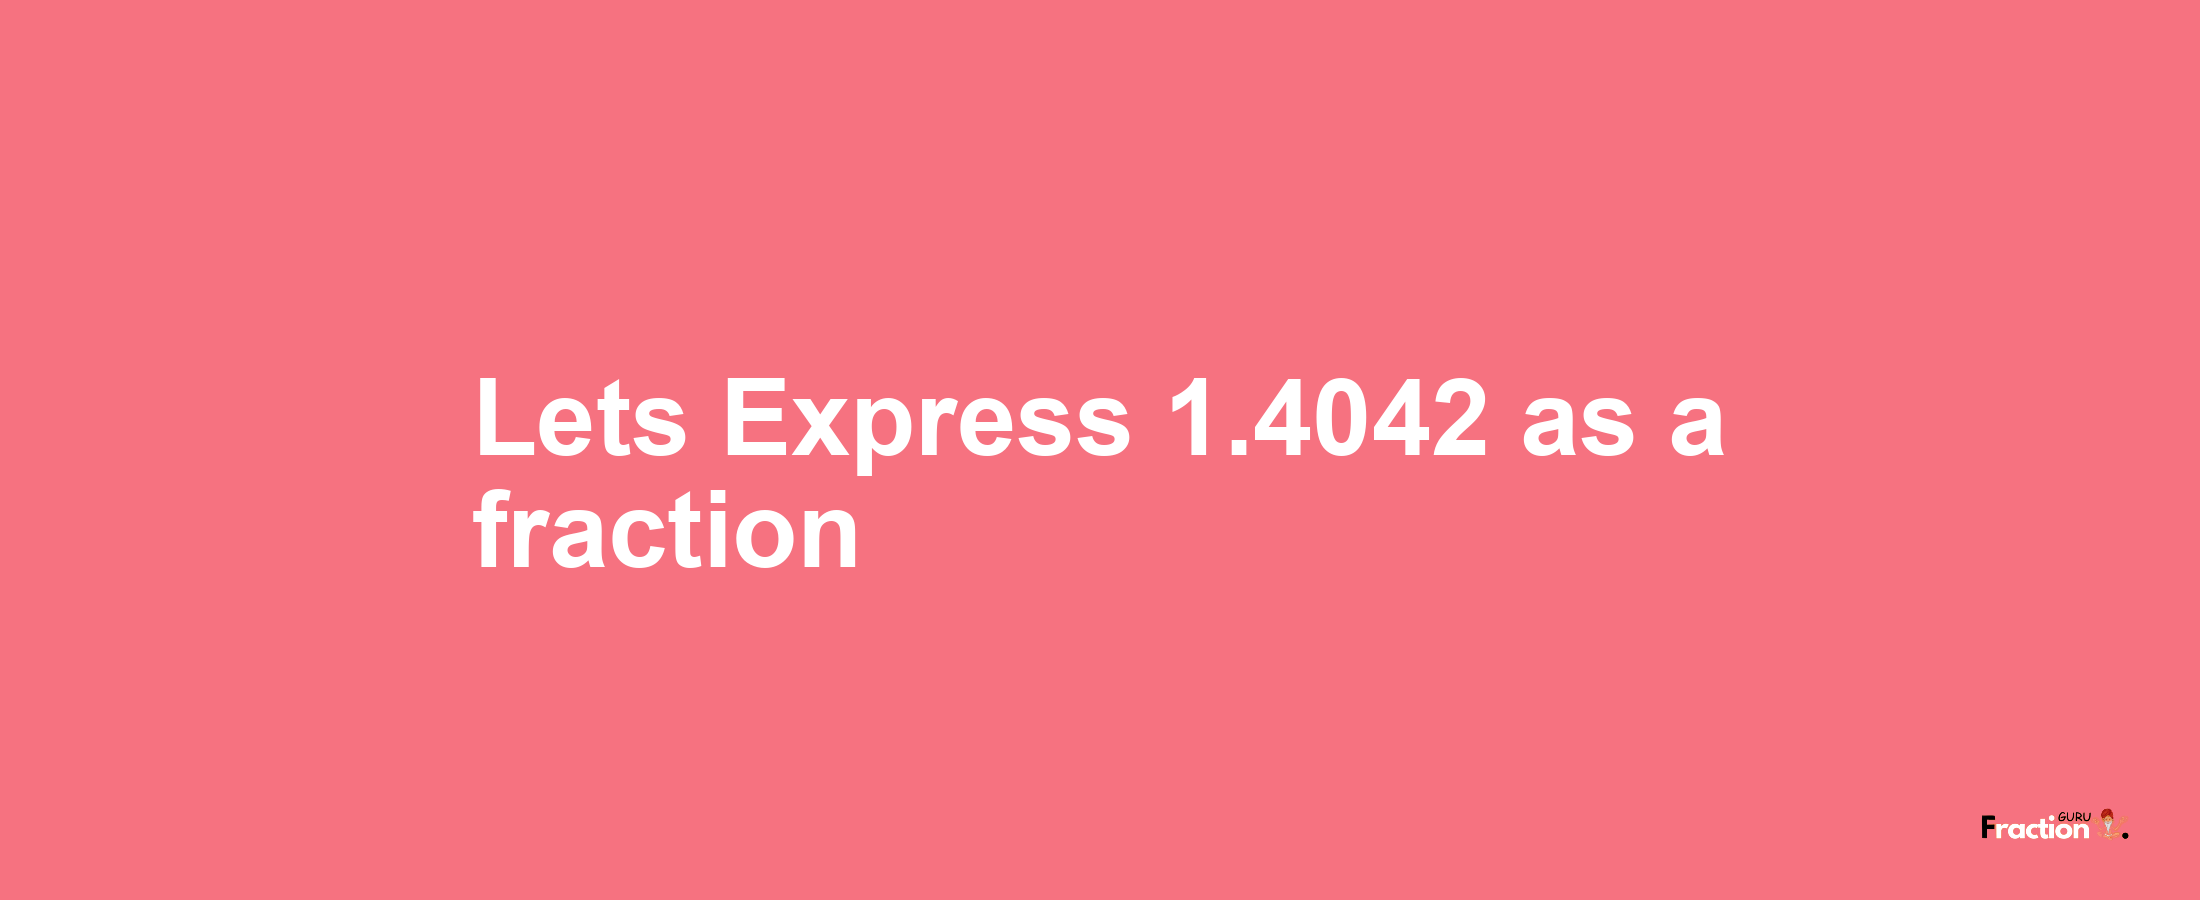 Lets Express 1.4042 as afraction